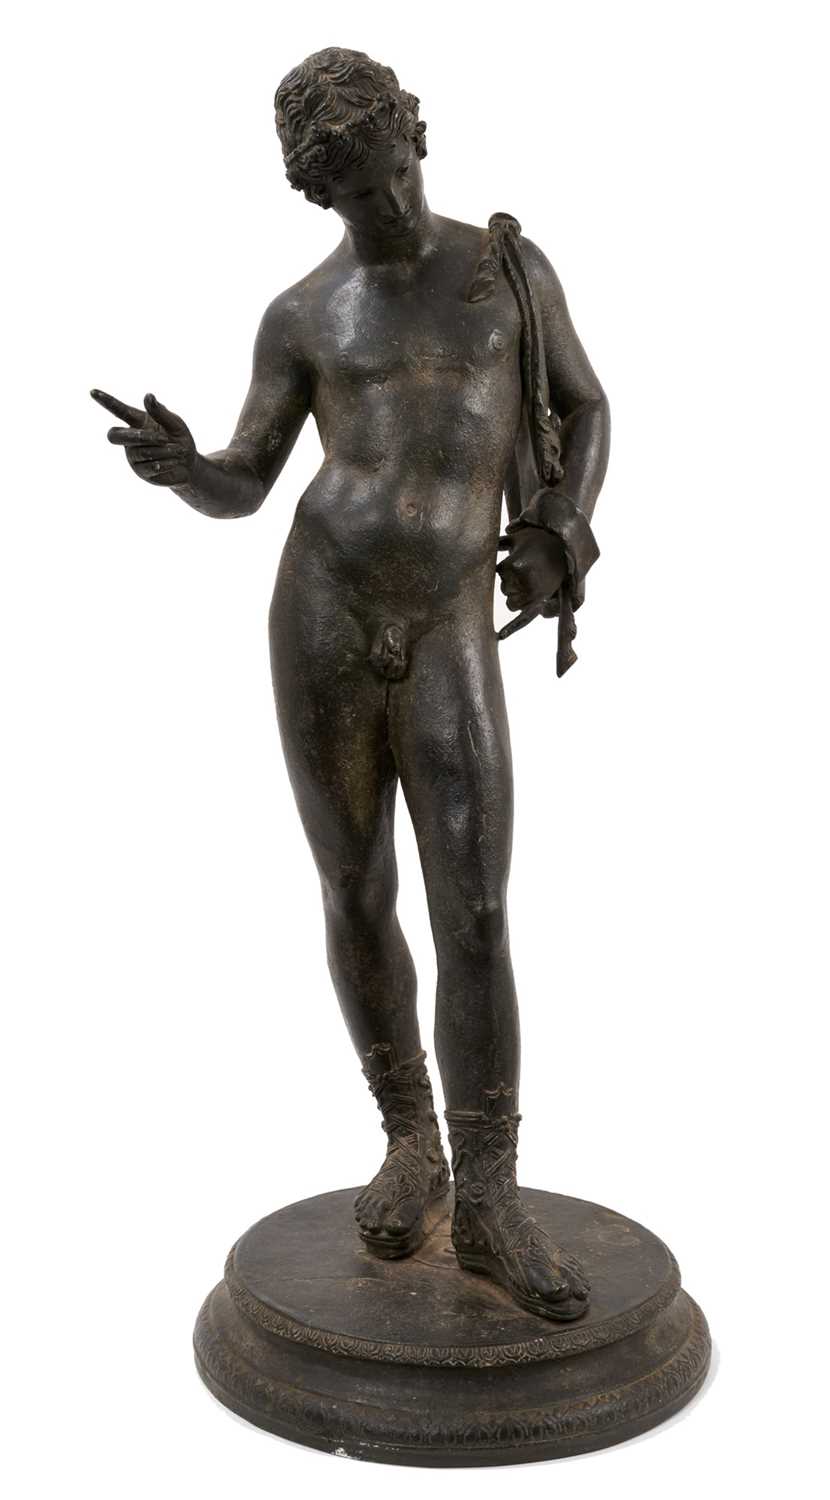 Lot 929 - Large 19th century Grand Tour bronze figure of Narcissus